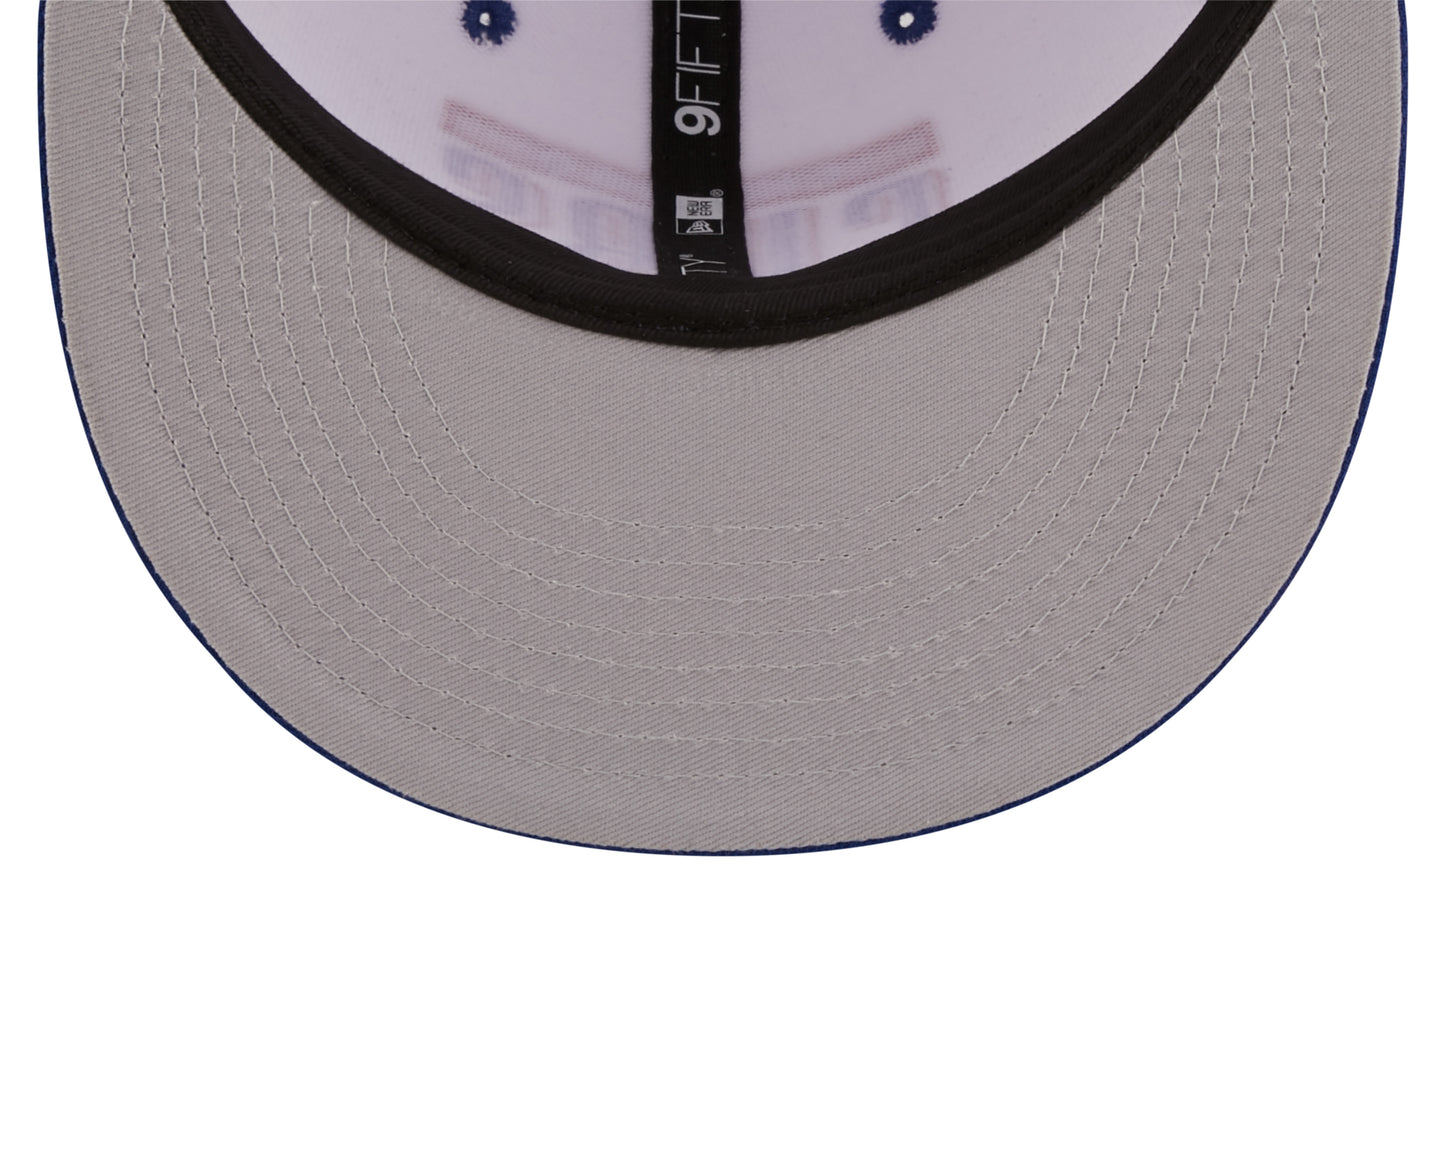 Chicago Cubs New Era Retro Title 9FIFTY Snapback Hat - White/Blue